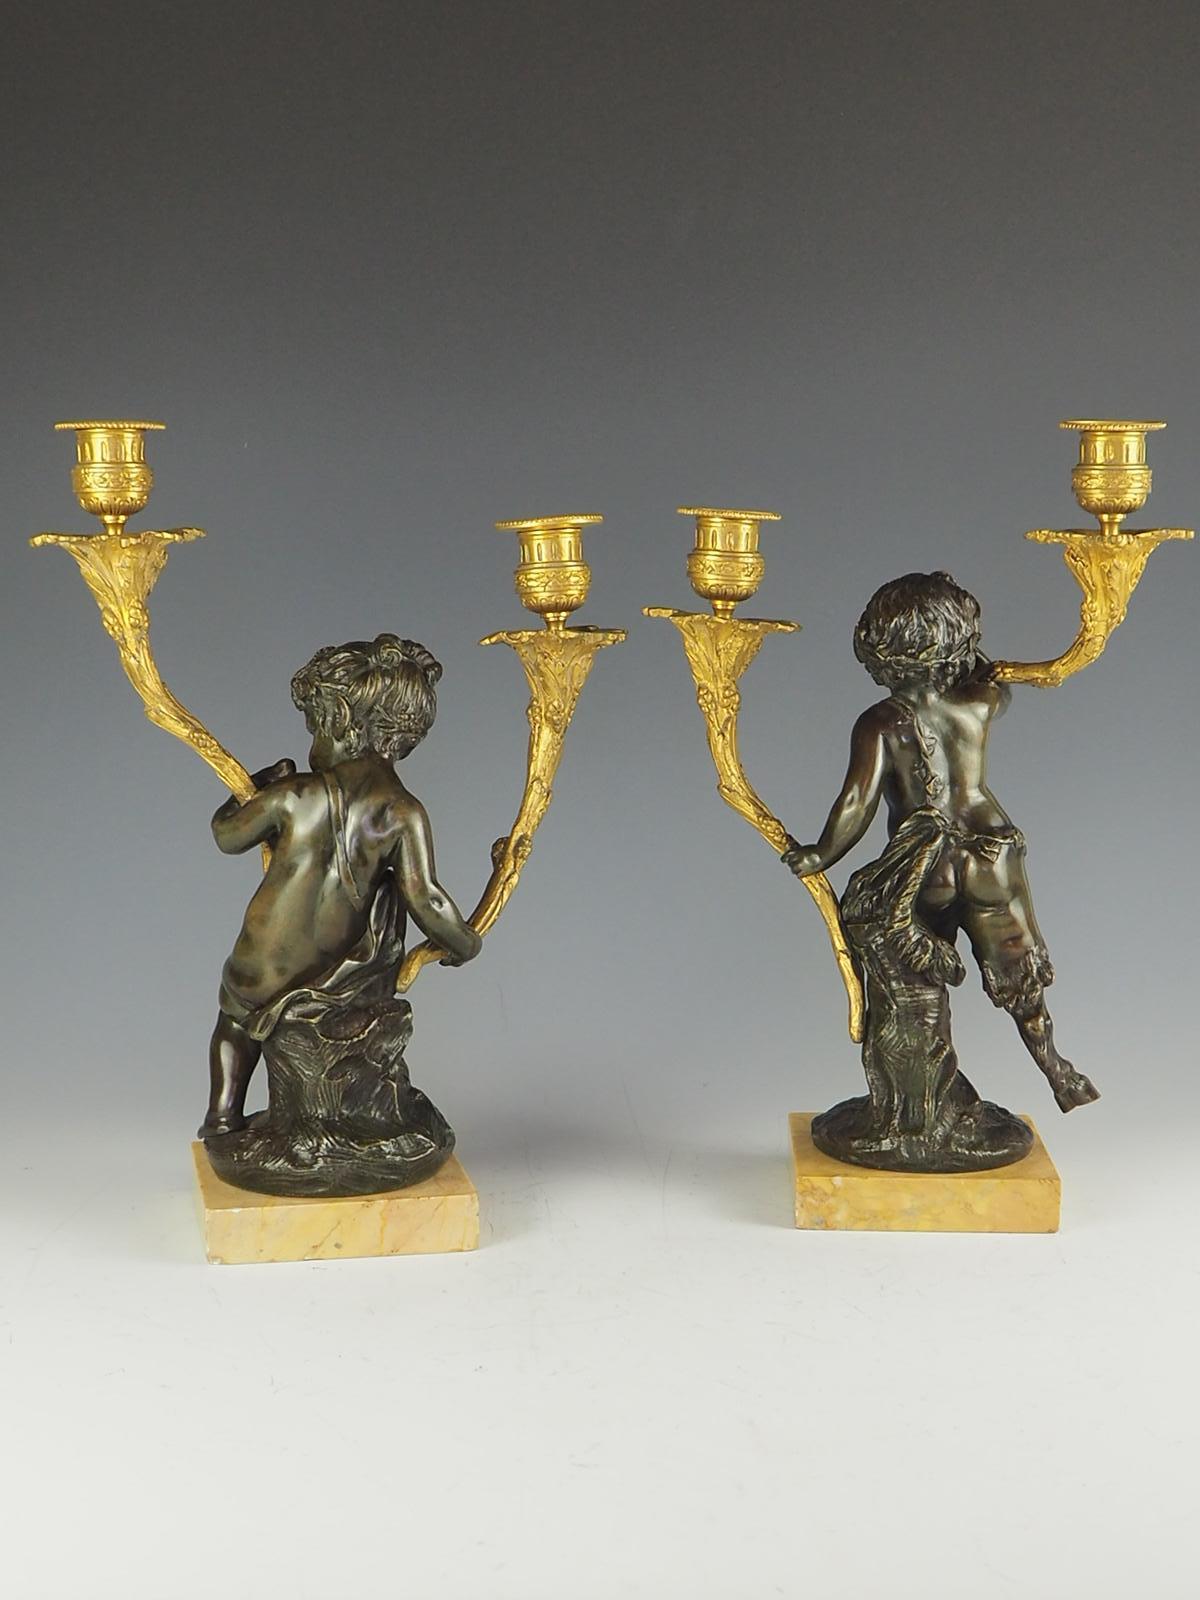 Pair of French Solid Bronze and Ormolu Candelabras, circa 1820 For Sale 2